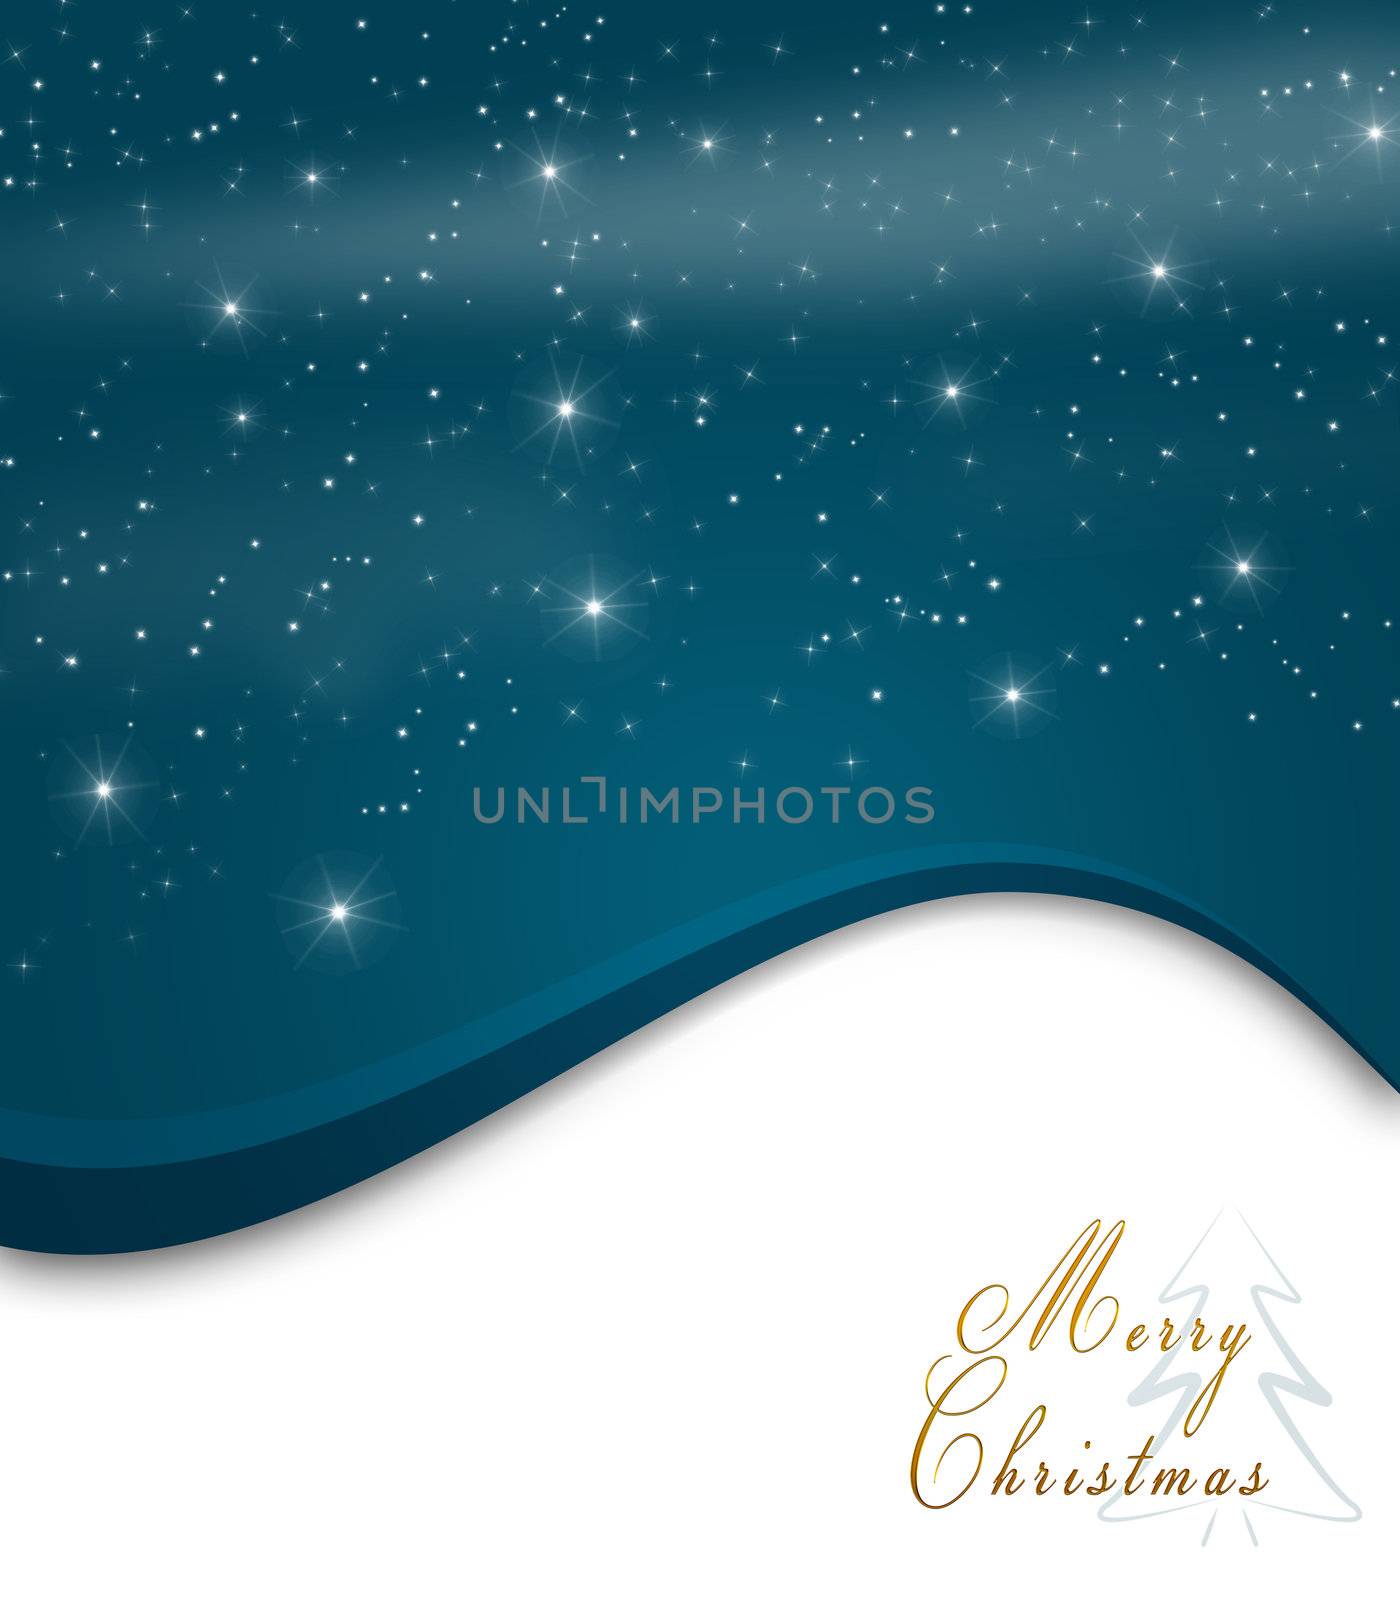 Blue Christmas background with white snowflakes, stars and Merry Christmas text